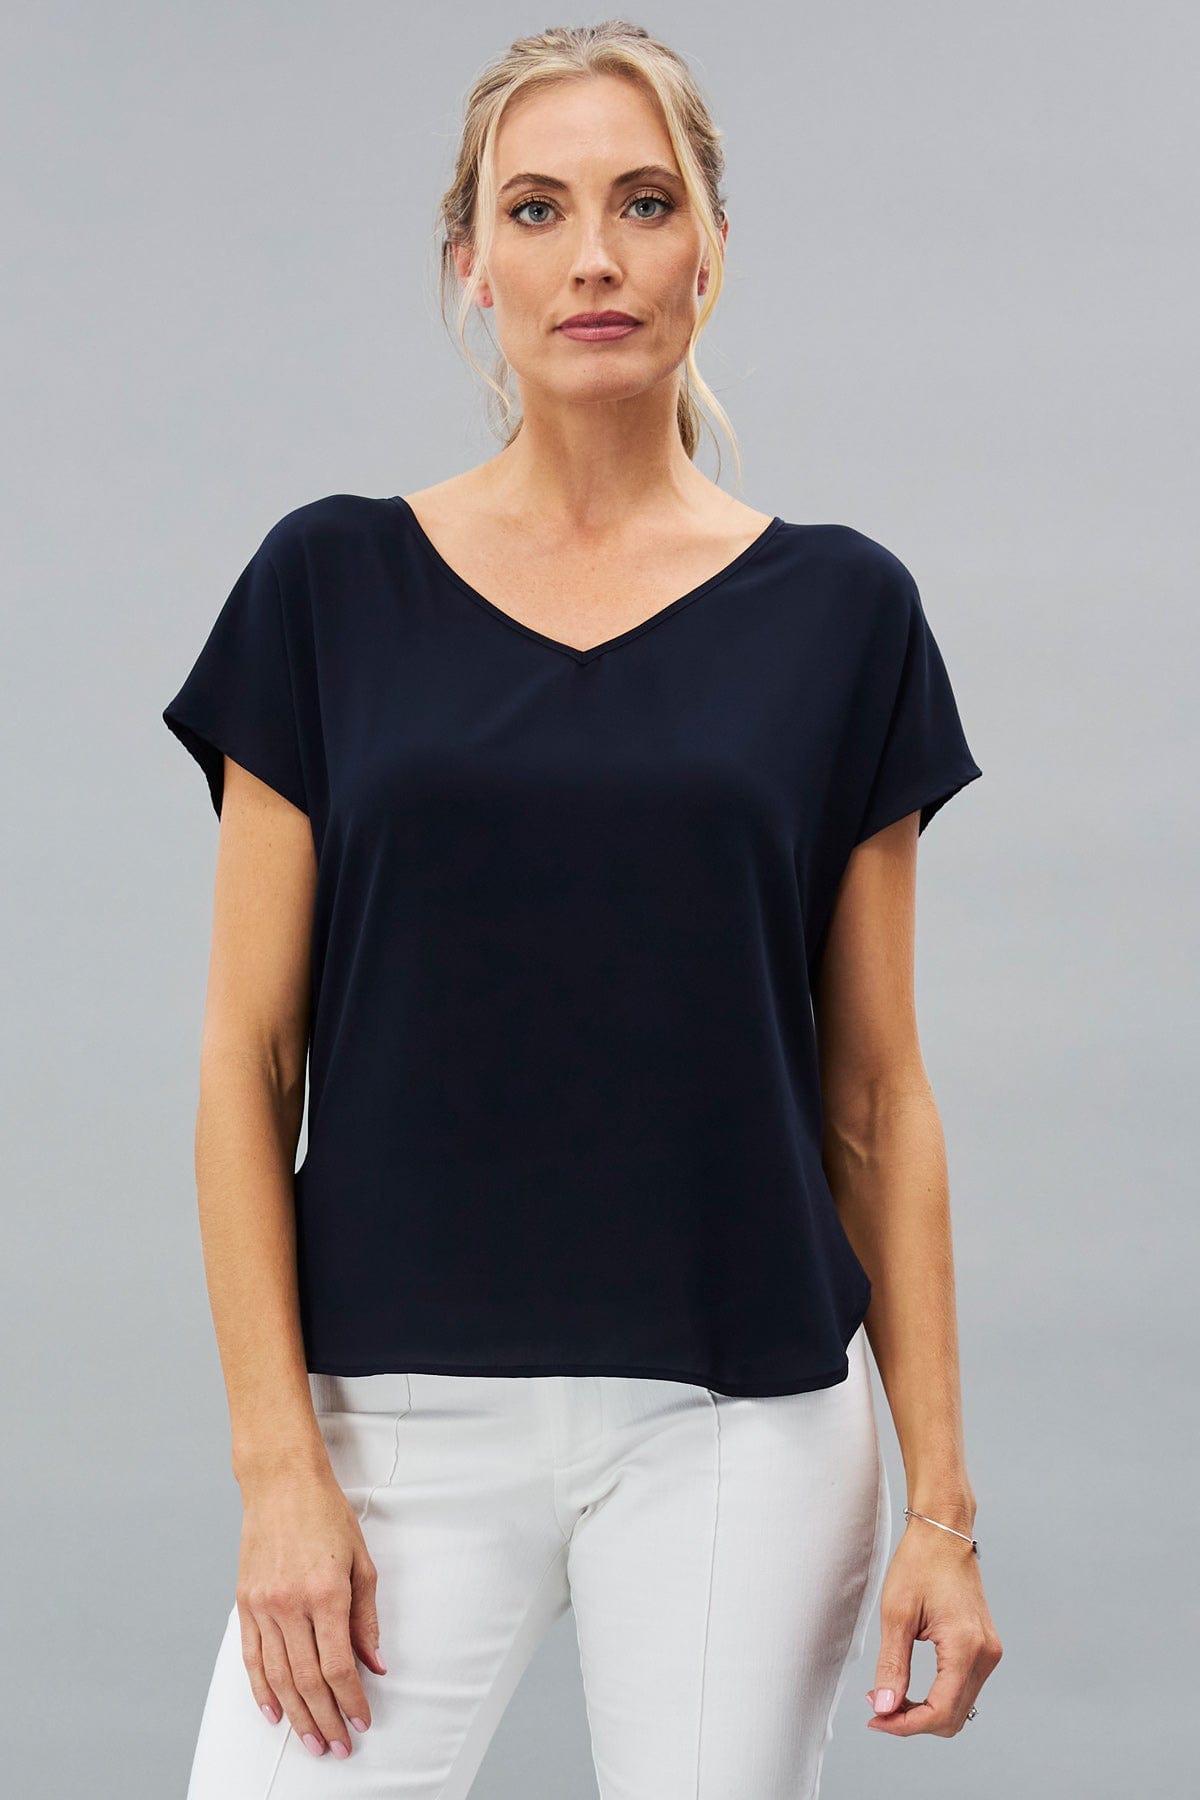 lola & sophie | Elevated contemporary women's clothing